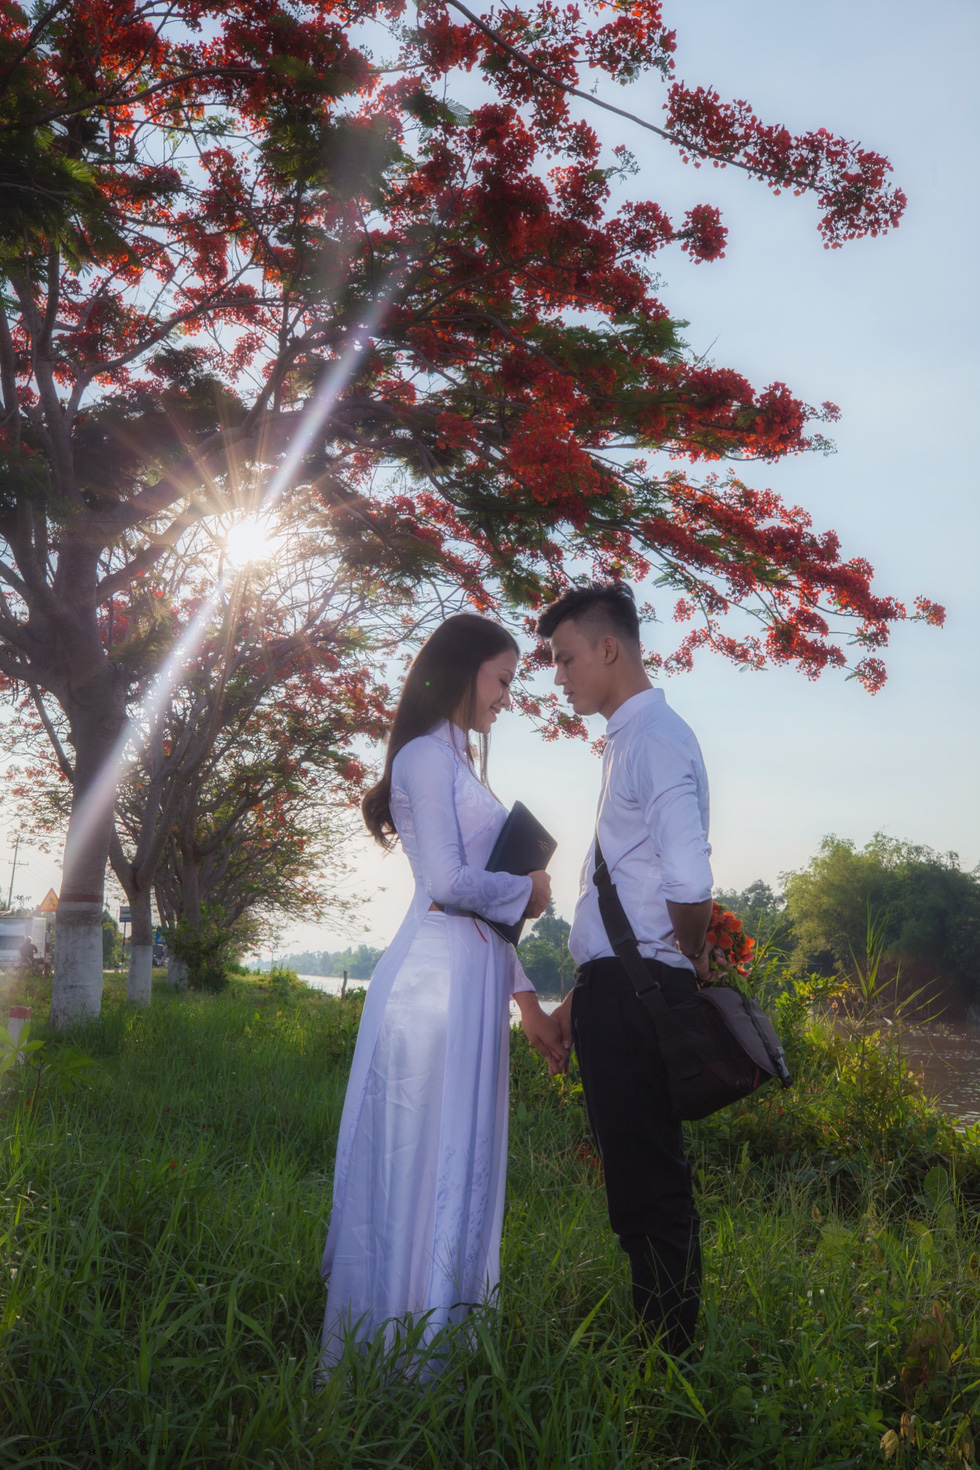 A young couple wearing school uniform pose under red flamboyant flowers in Dong Thap Province, southern Vietnam. Photo: Tuoi Tre